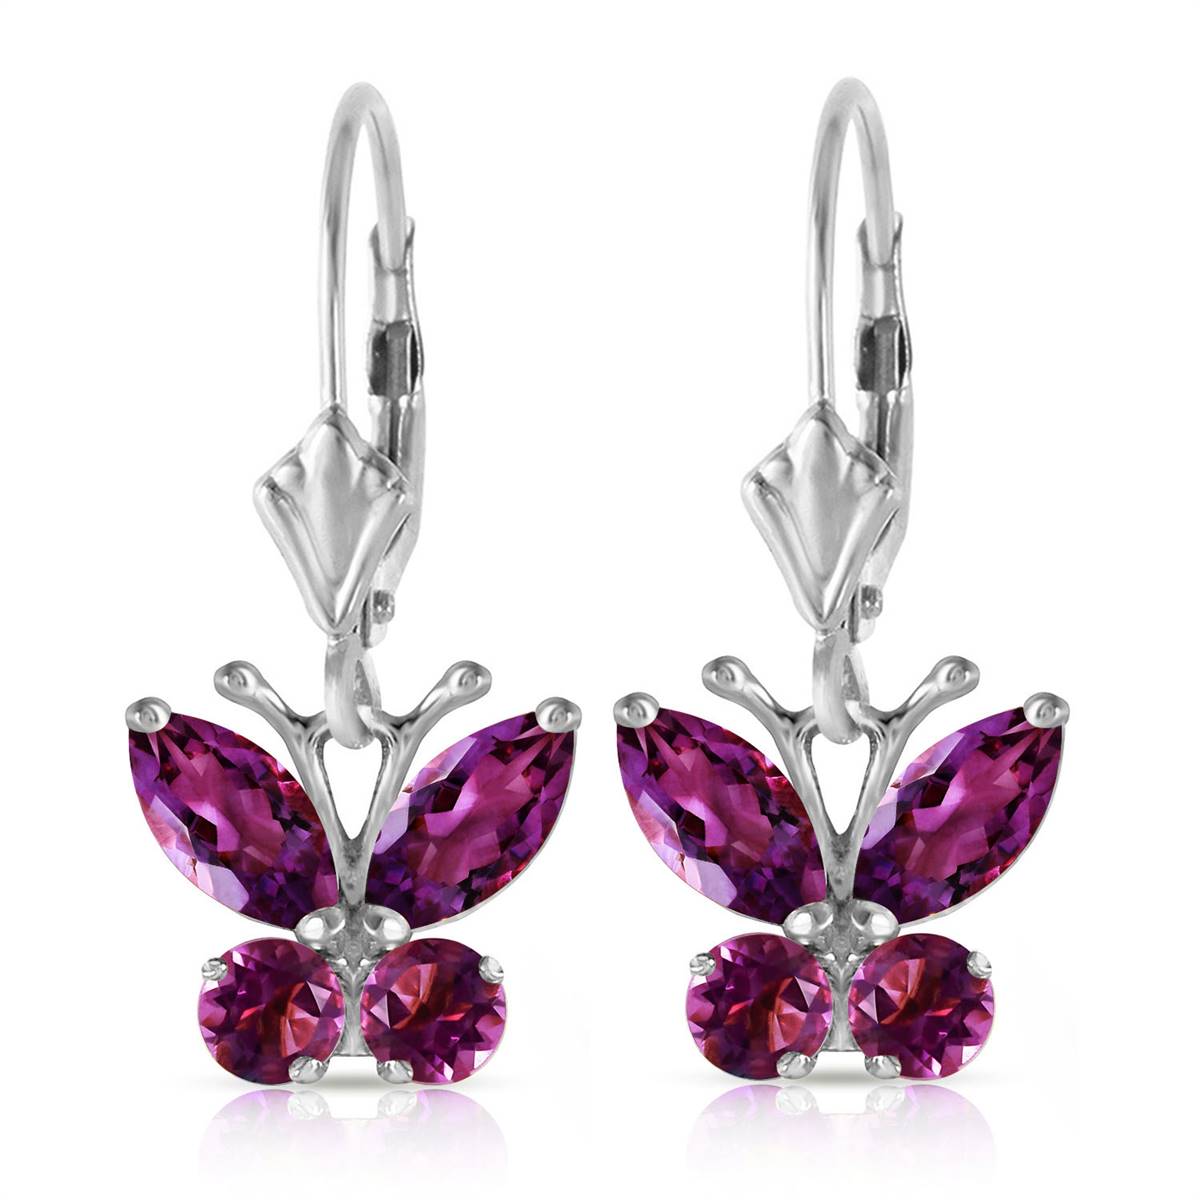 1.24 Carat 14K Solid White Gold Butterfly Earrings Natural Amethyst